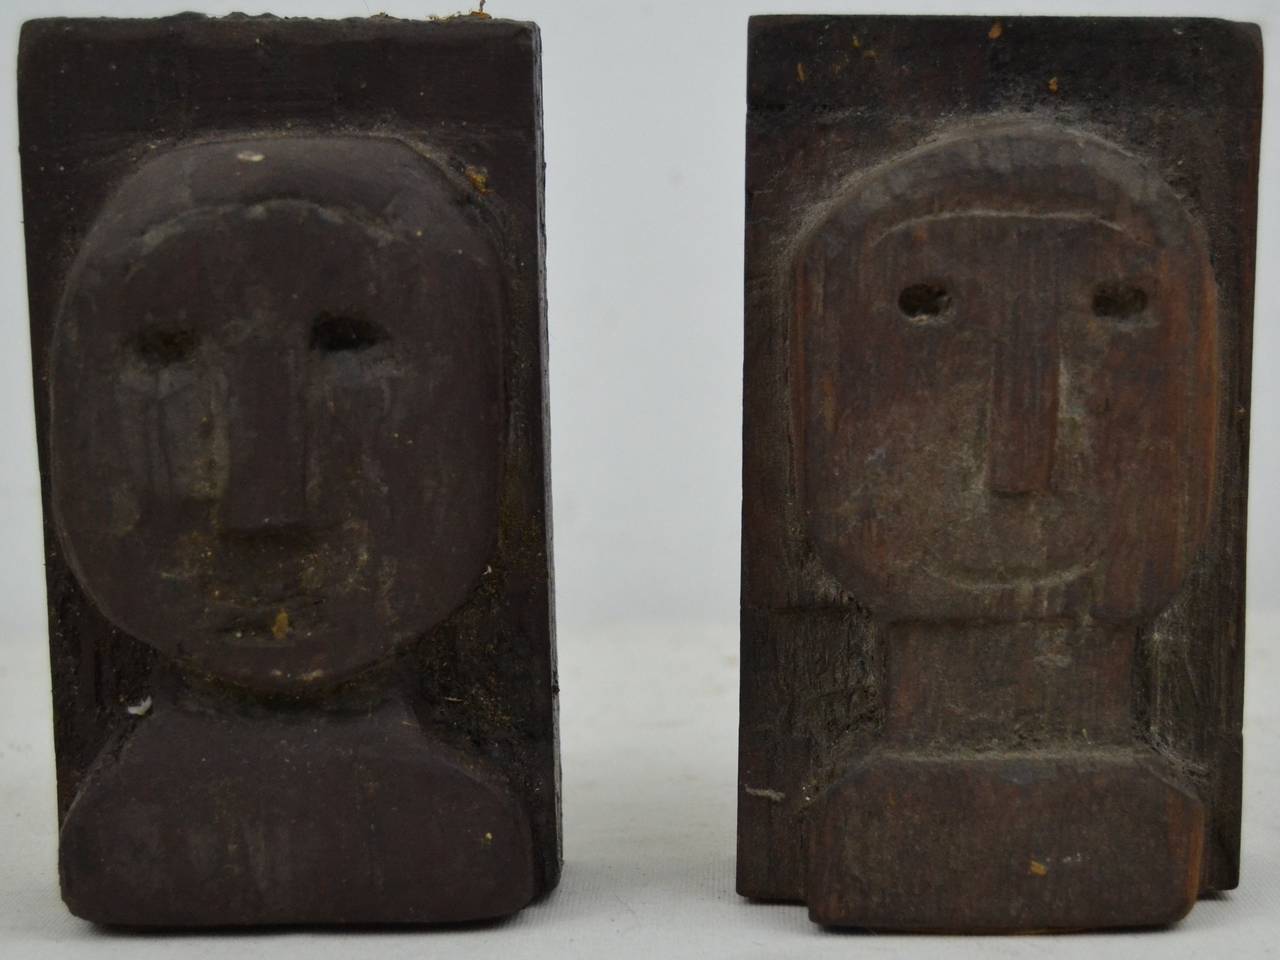 Two relief carved faces, simple and direct Folk Art statements.